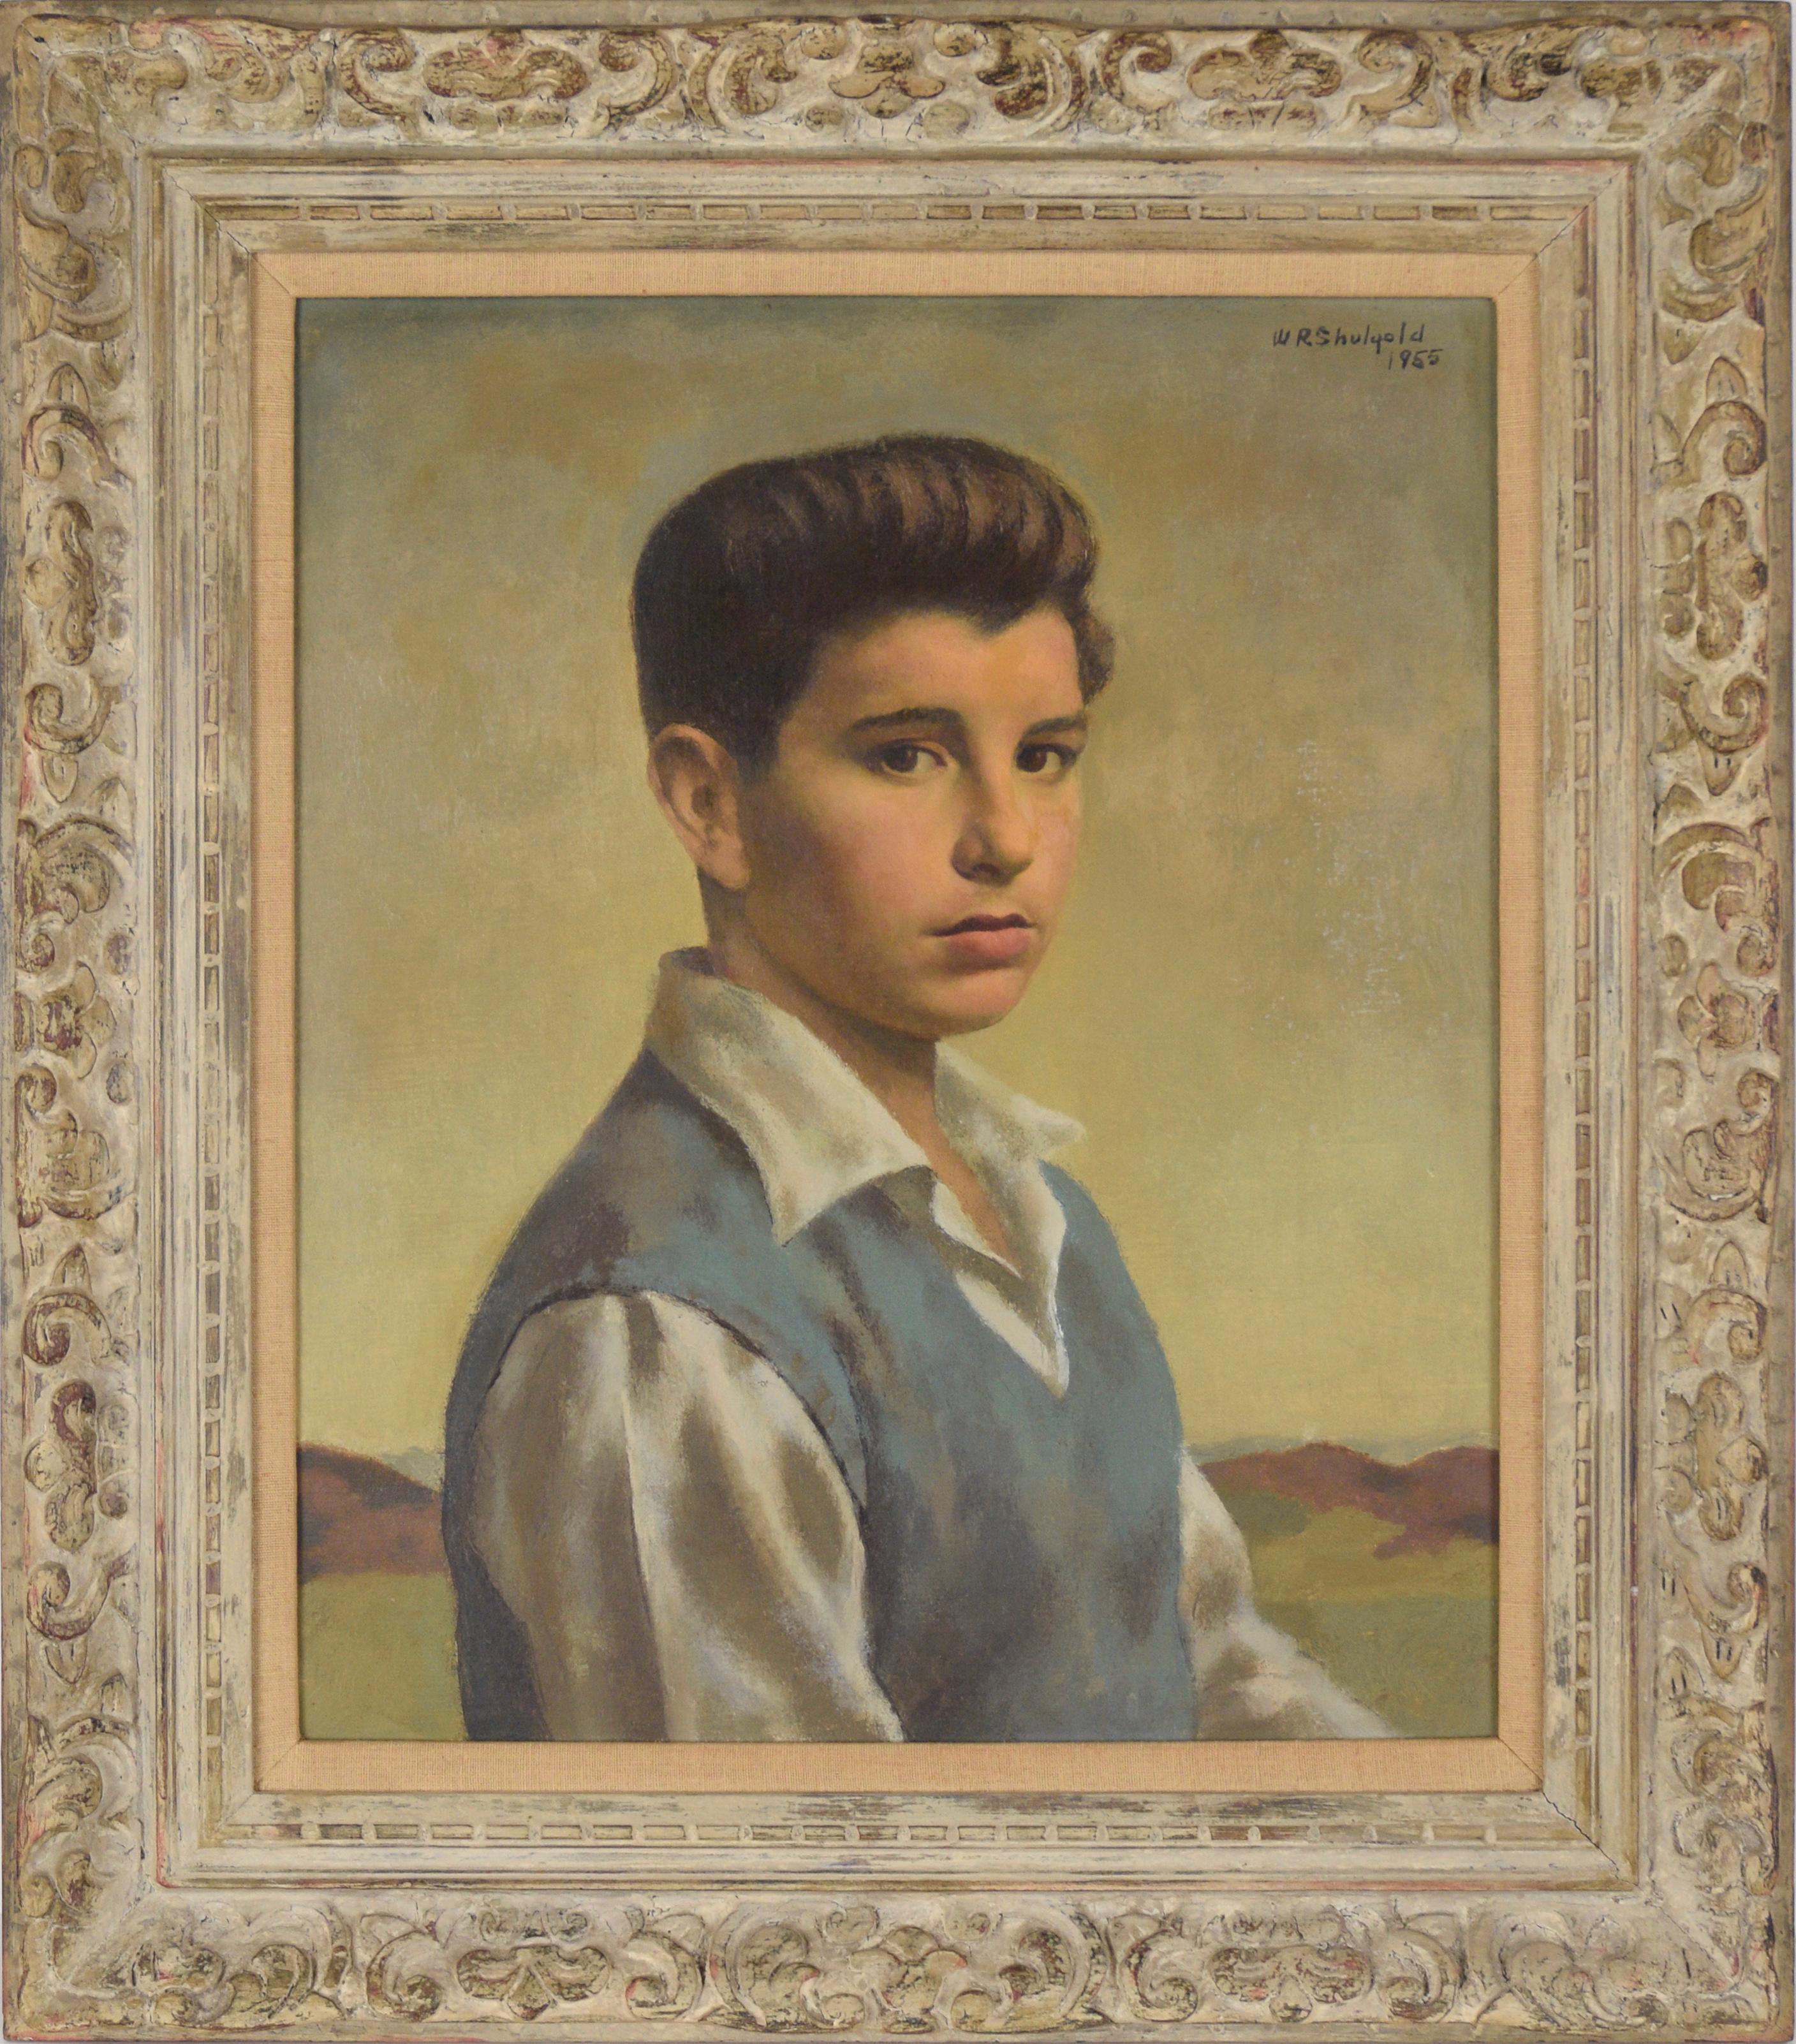 William Robert Shulgold  Figurative Painting - "Child Star" Mid Century Portrait of a Boy with Brown Eyes Oil on Canvas